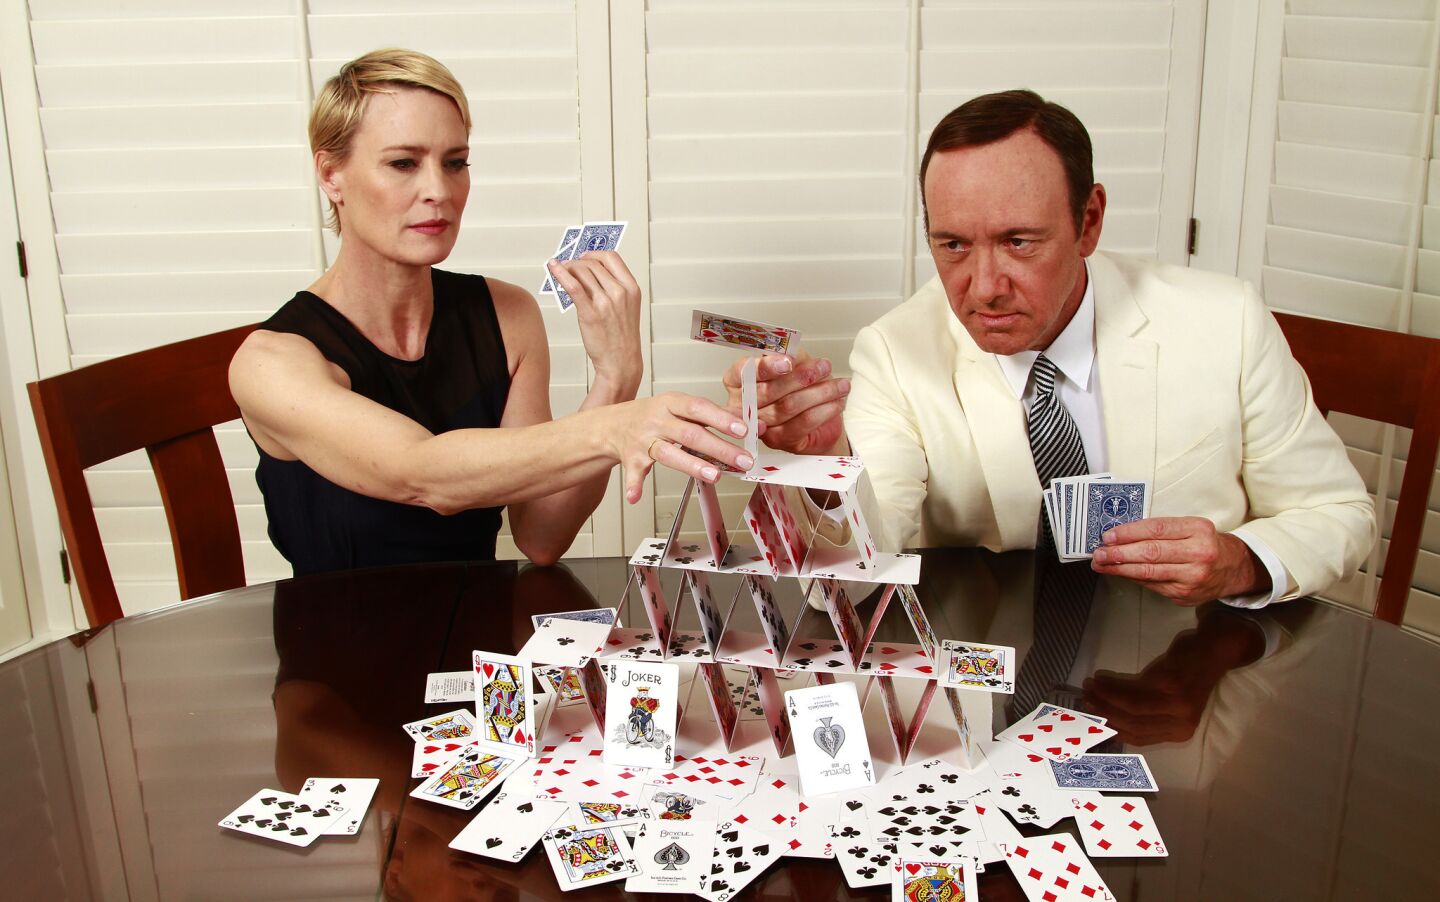 Drama Series Lead actor in a drama: Kevin Spacey (Frank Underwood) Lead actress in a drama: Robin Wright (Claire Underwood) WINNER: Director for a drama: David Fincher ("Chapter 1")